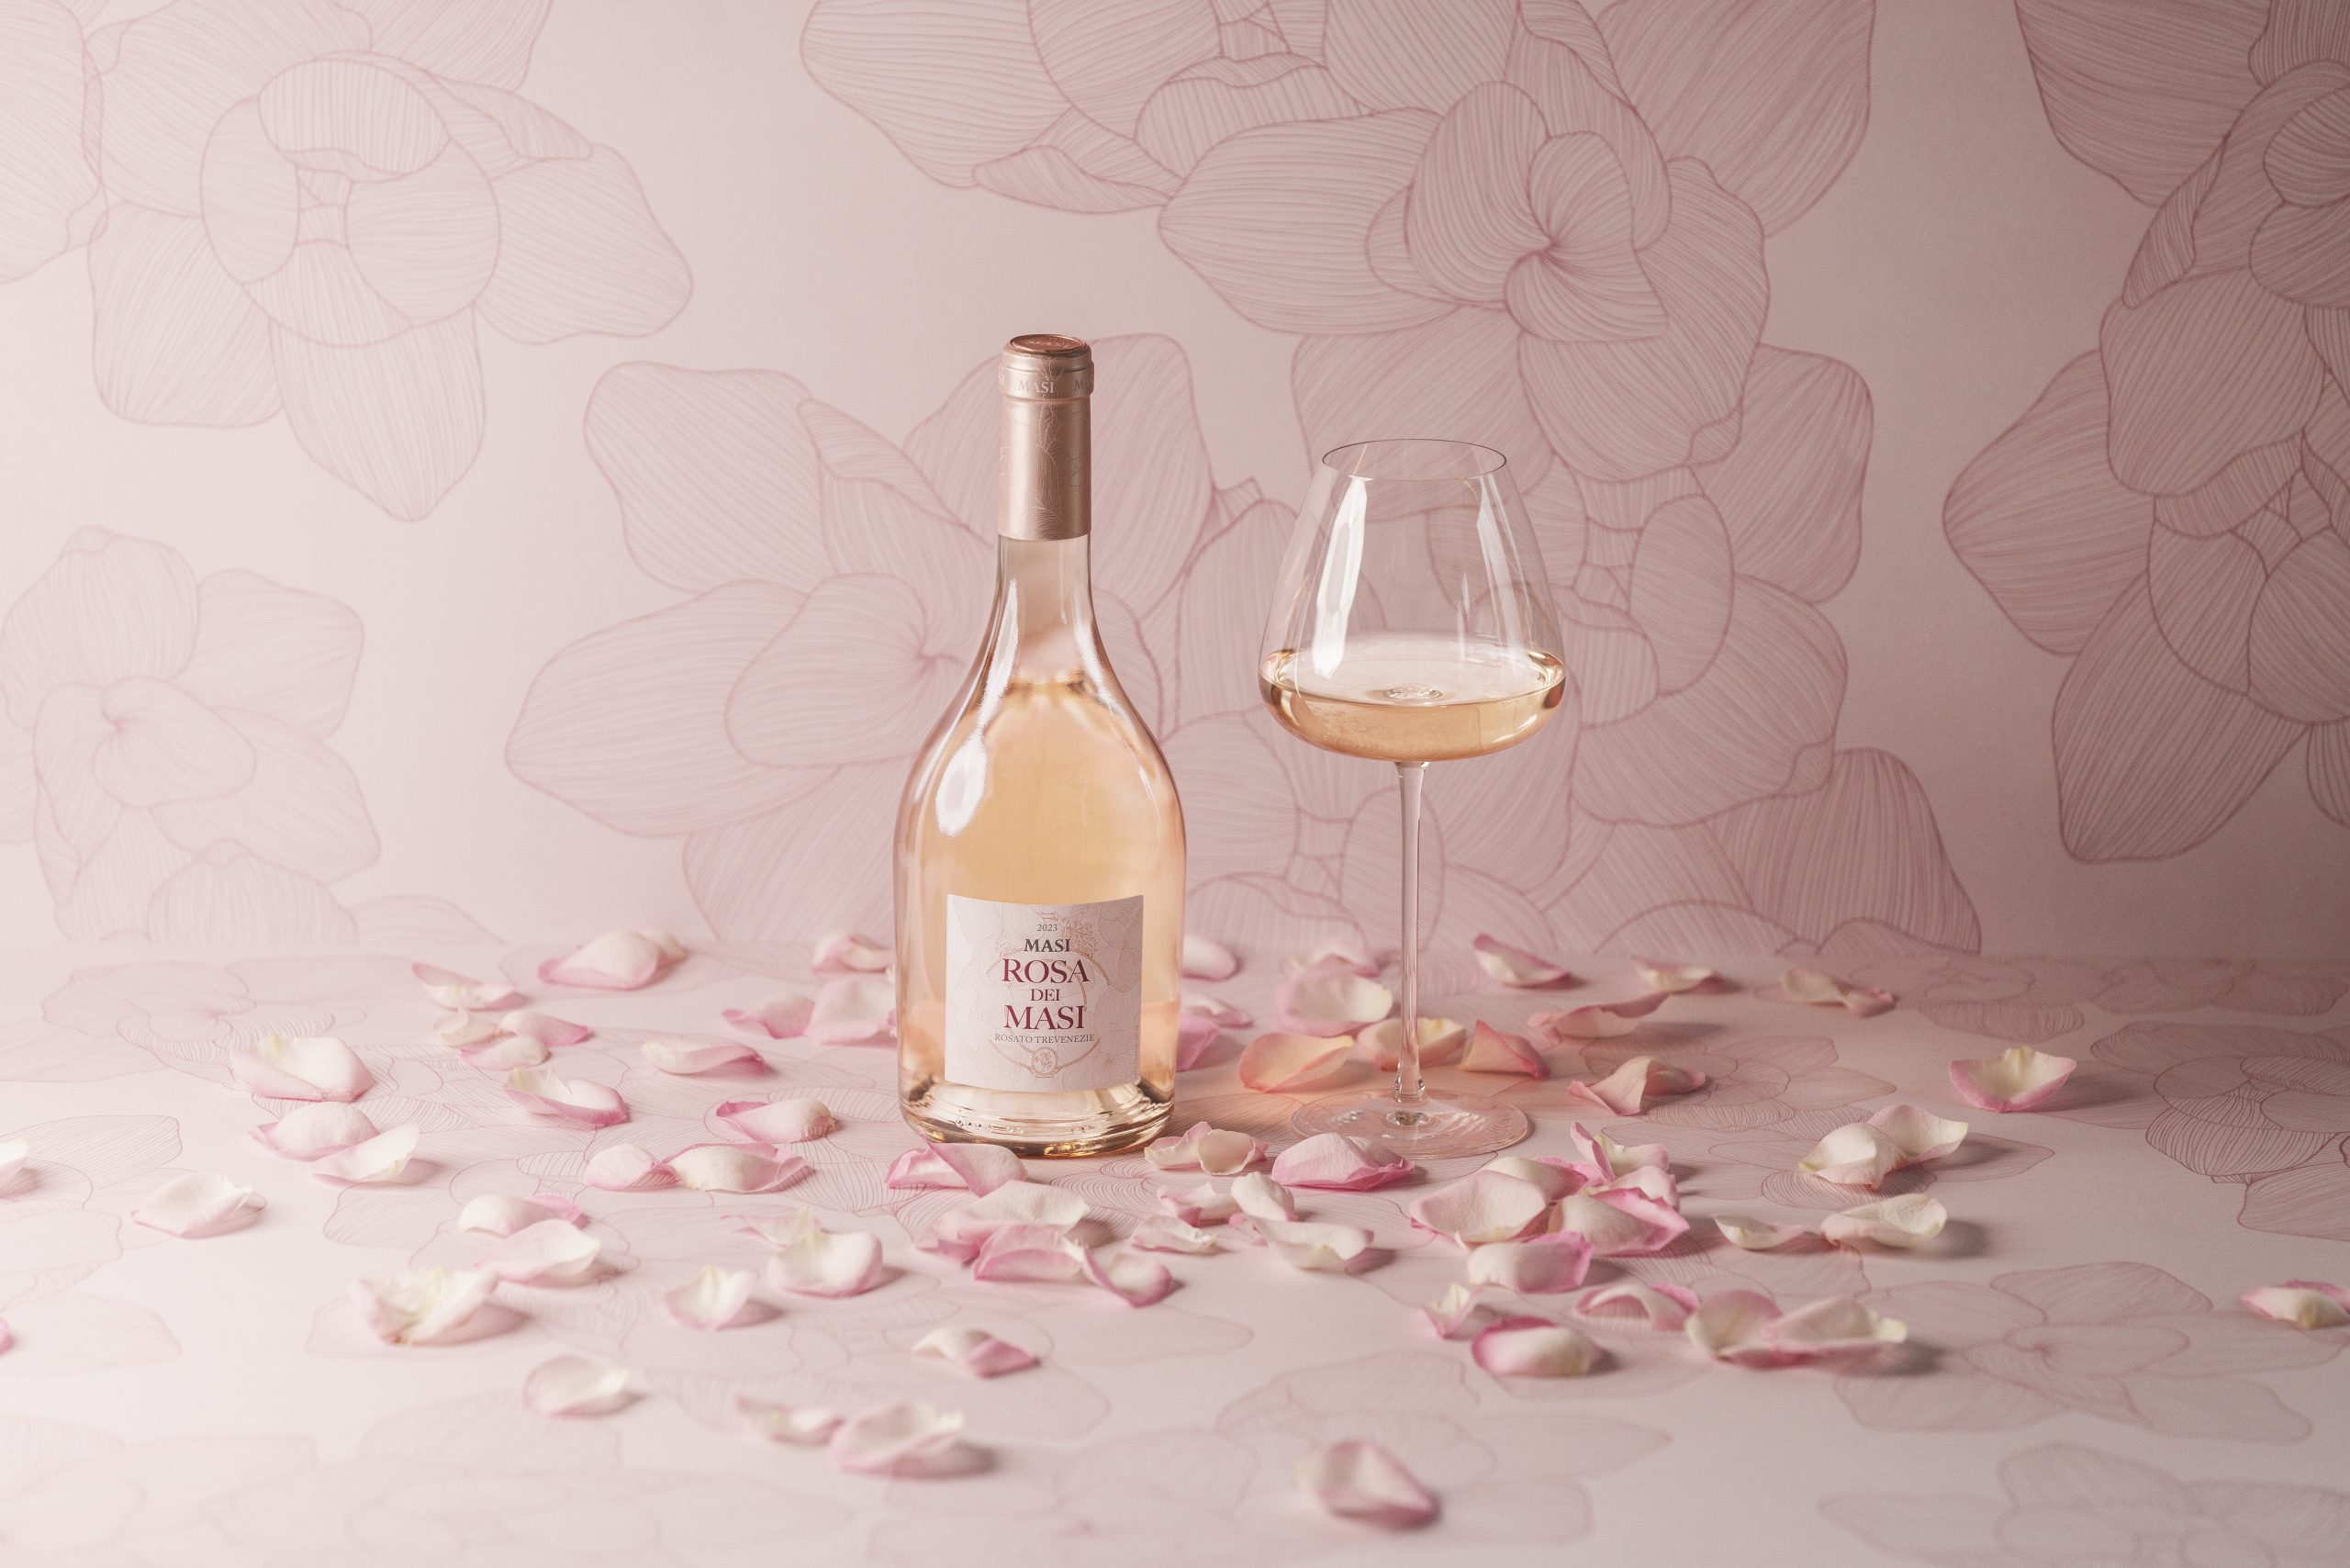 A bottle of the new Rosa dei Masi sits next to a glass of the wine. Rose petals are scattered around and the pale pink backdrop has the same ink-drawn rose motifs as the bottle.